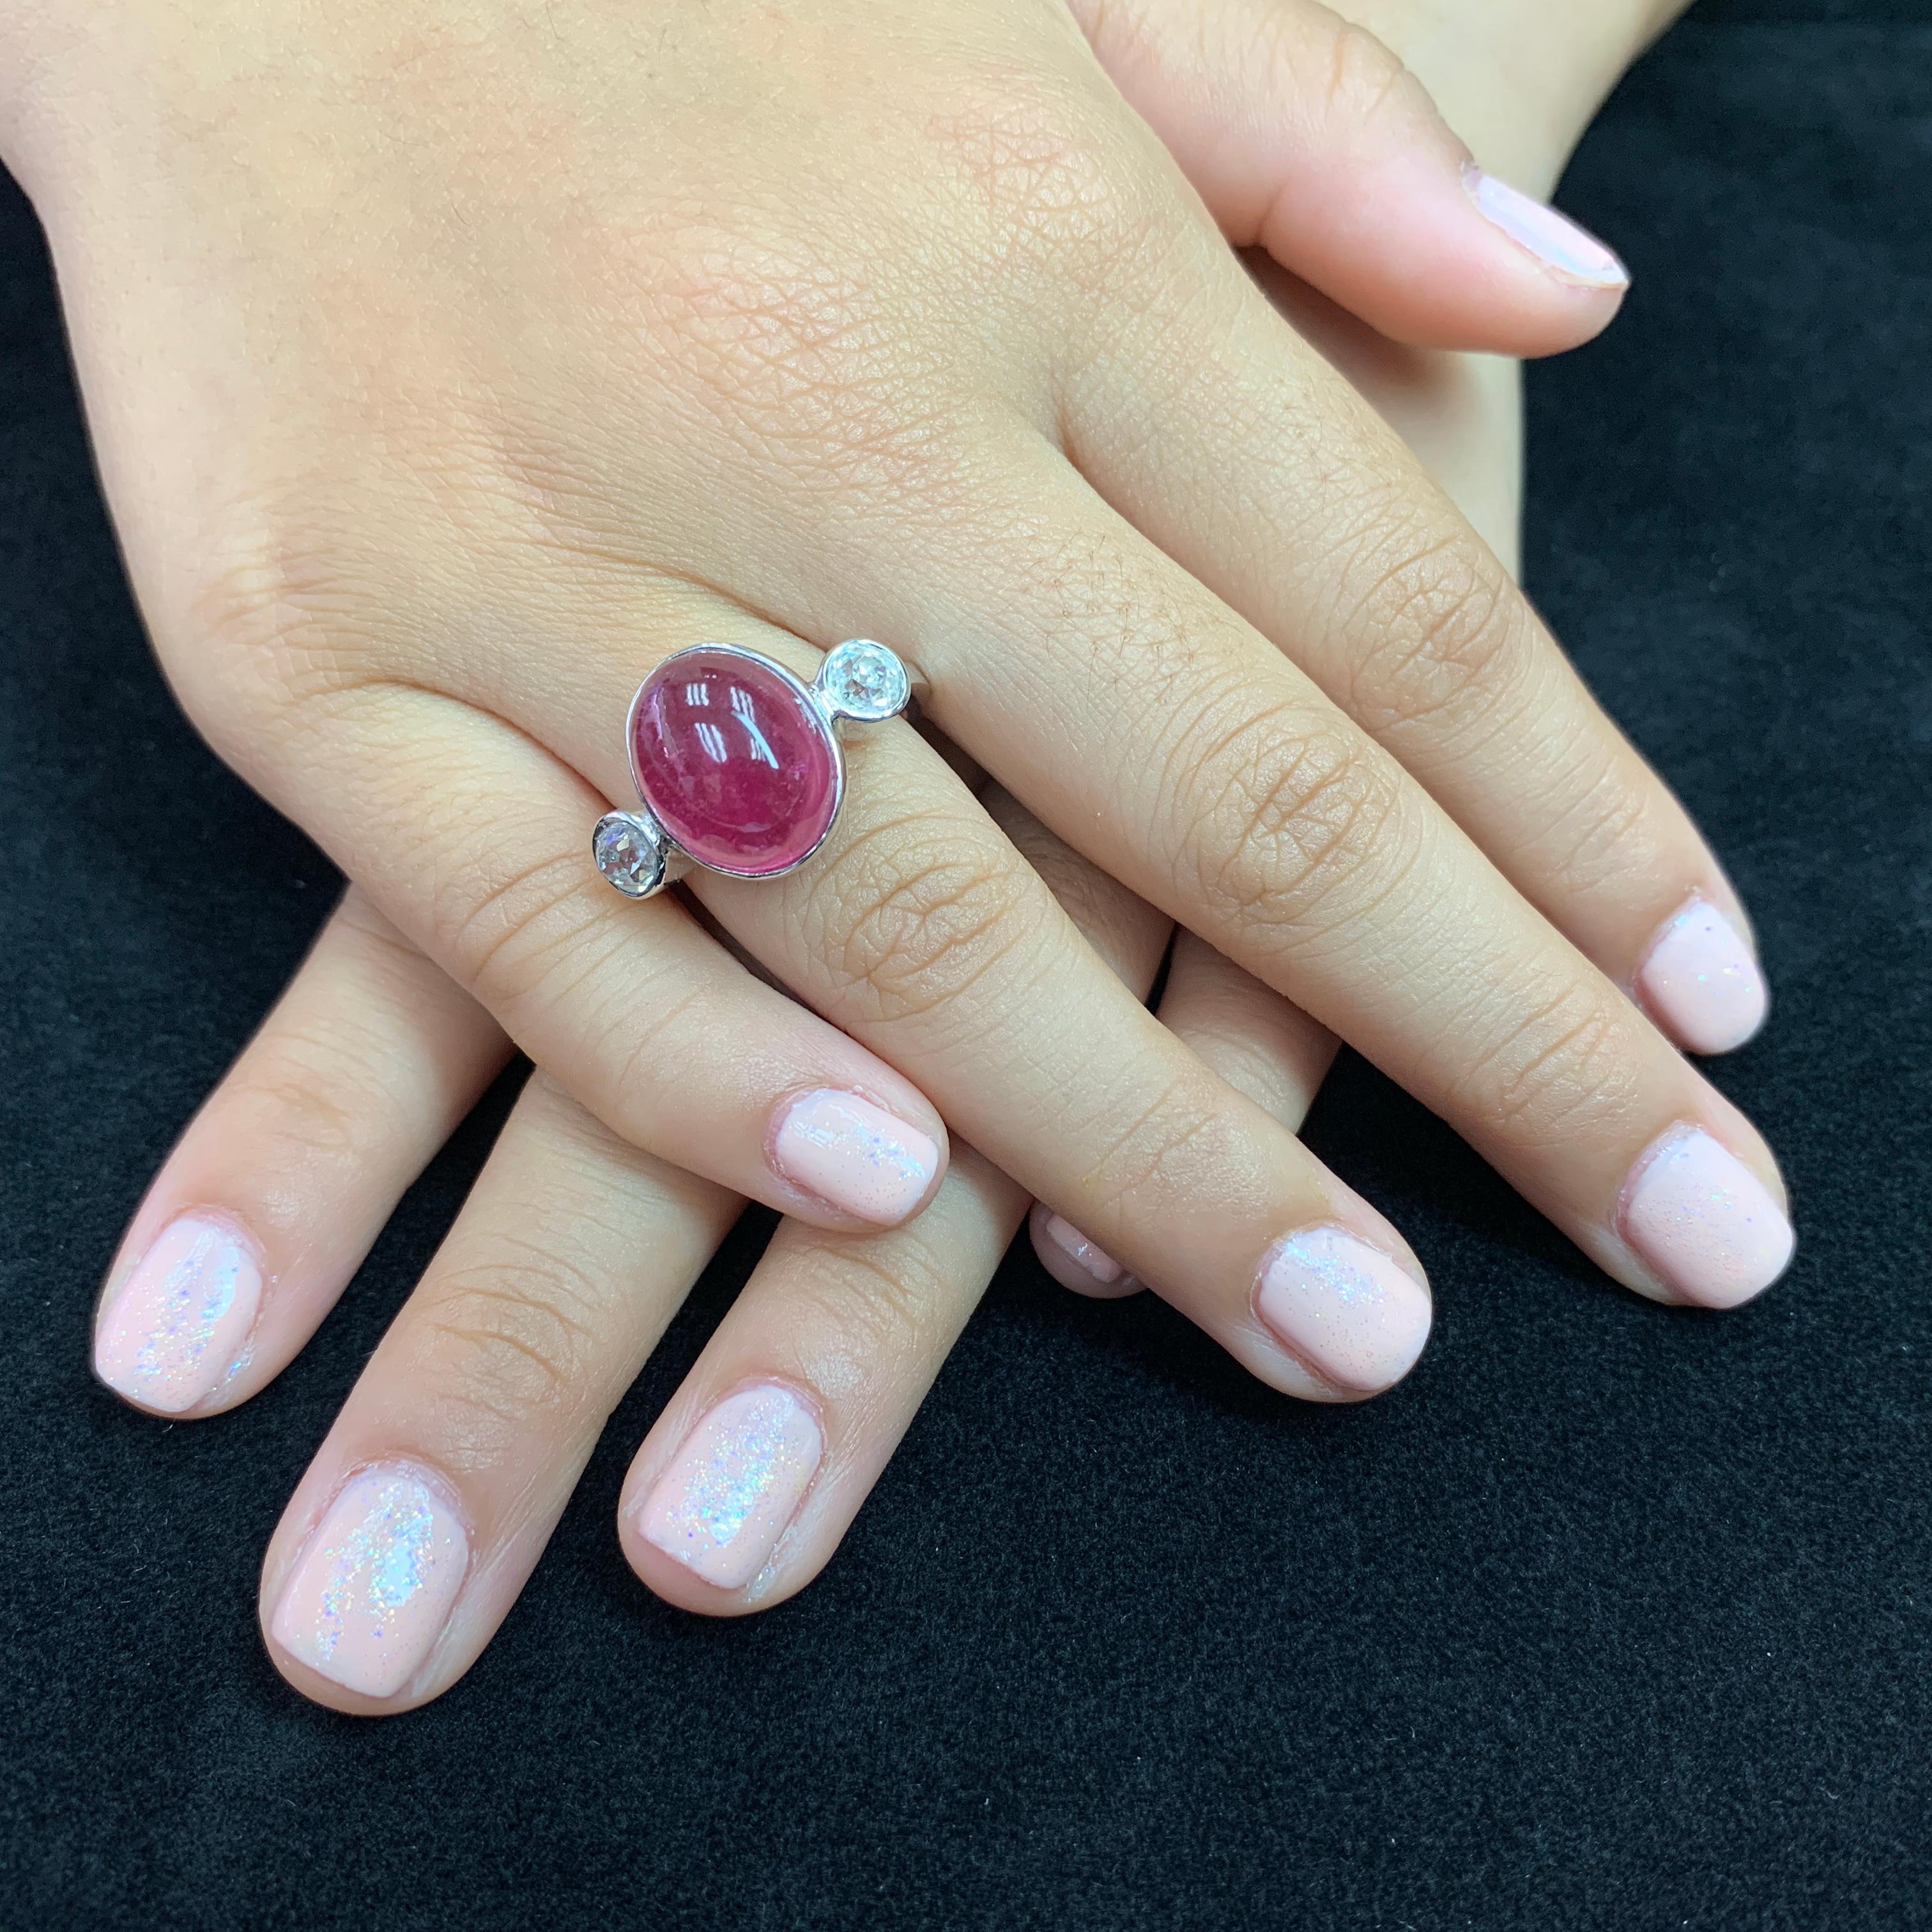 Here is a nice natural pink tourmaline ring with true old mine cut diamonds. This ring will defiantly make a statement. It is impressive! The ring is set in 18k white gold. The center pink tourmaline has a nice high dome and it is 10.16 Cts. On each